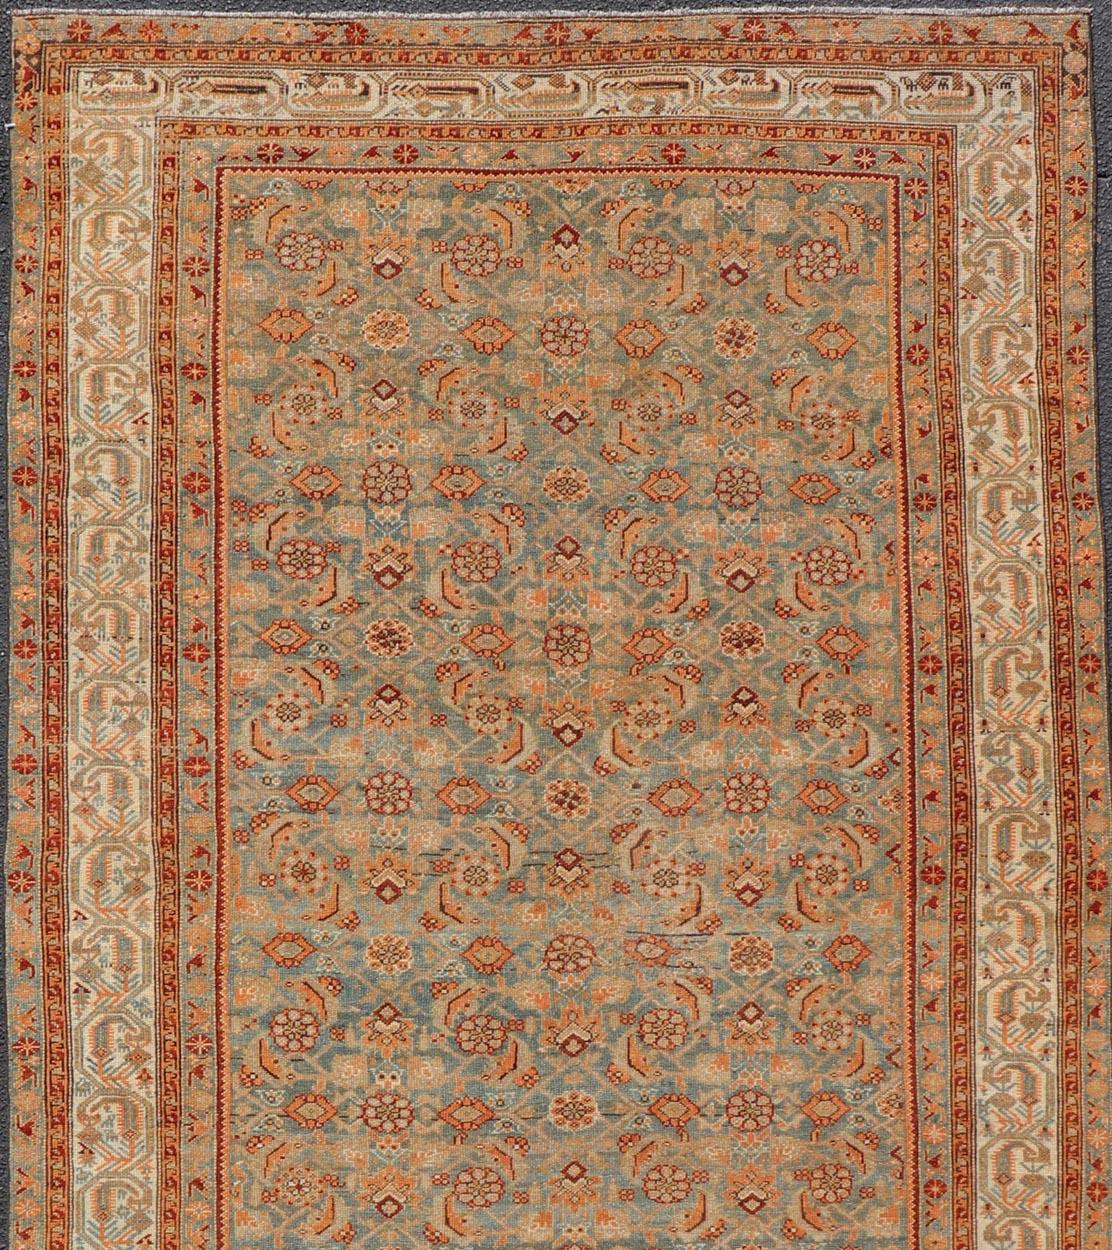 Measures: 5'8 x 14'0 

This antique Persian Kurdish gallery rug is filled with eccentric colors and details. The multi-tiered border features nature motifs rendered in the same colors of the field. The field design is rendered in orange, red,